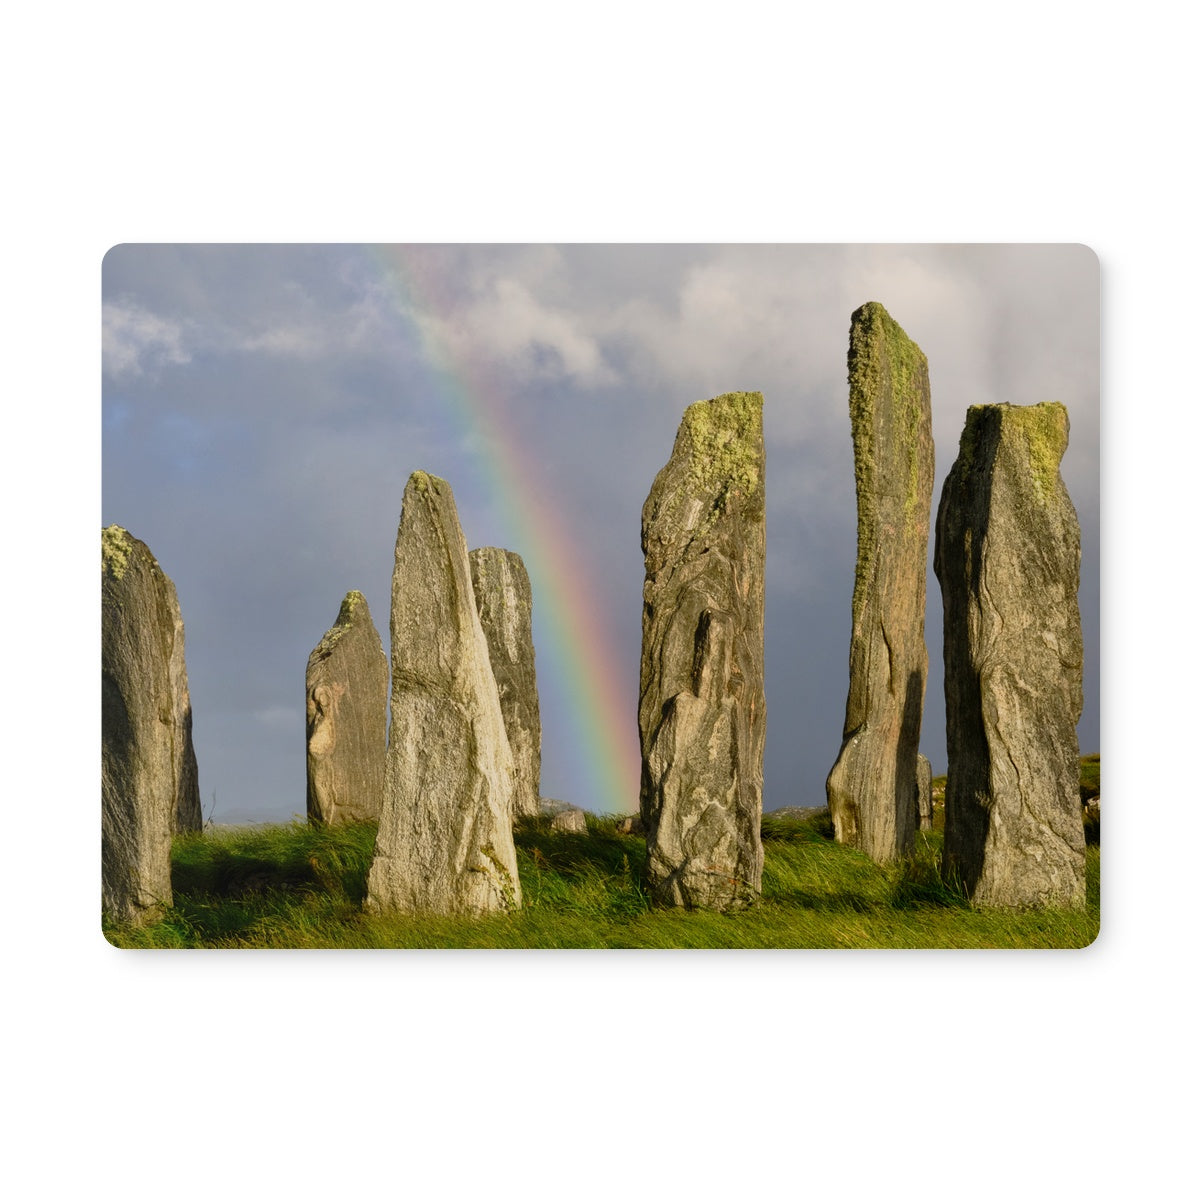 Callanish and Rainbow Placemat